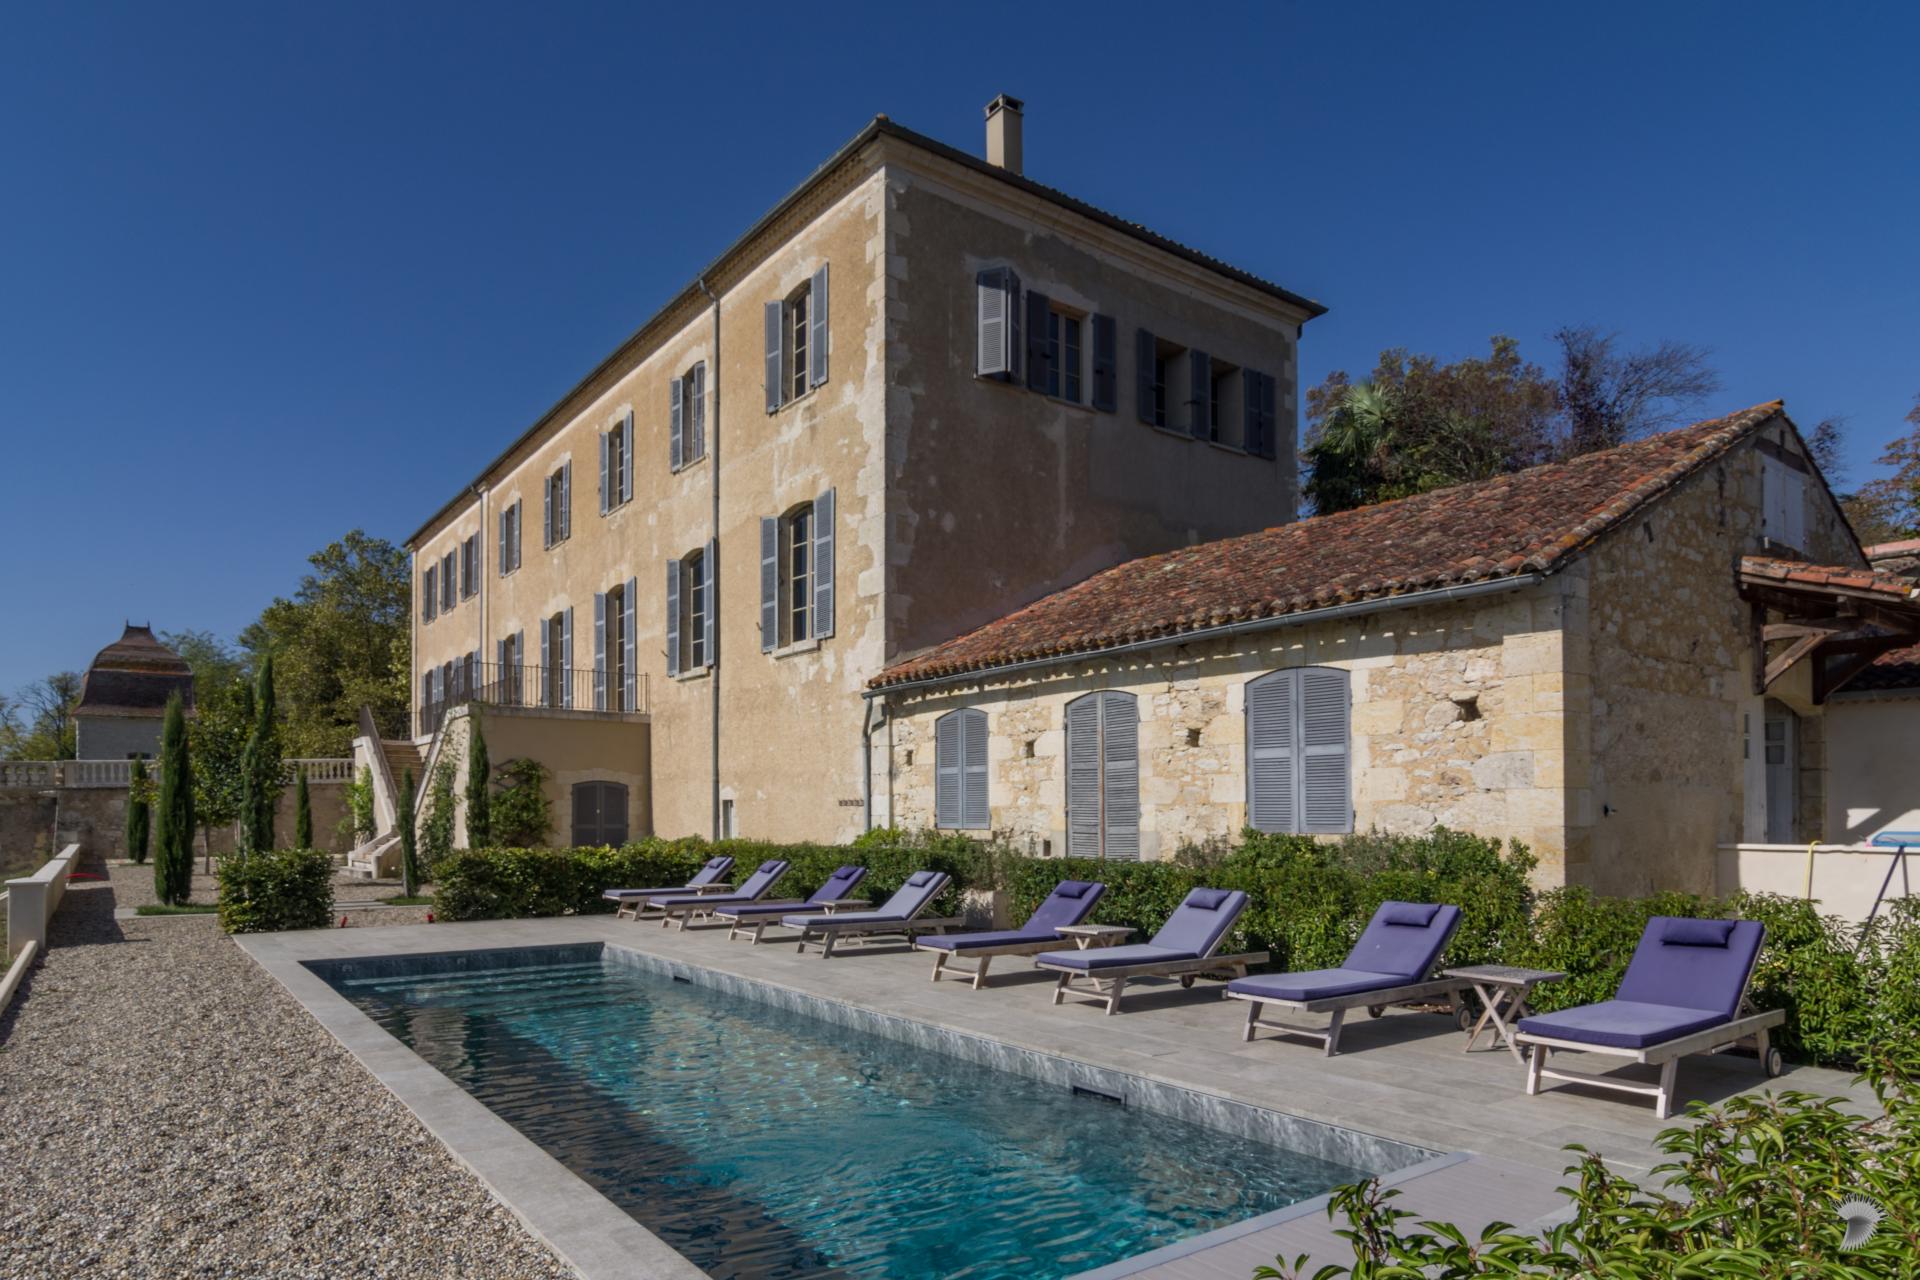 Immerse yourself in history and beauty at south west France’s mighty Château de Balarin